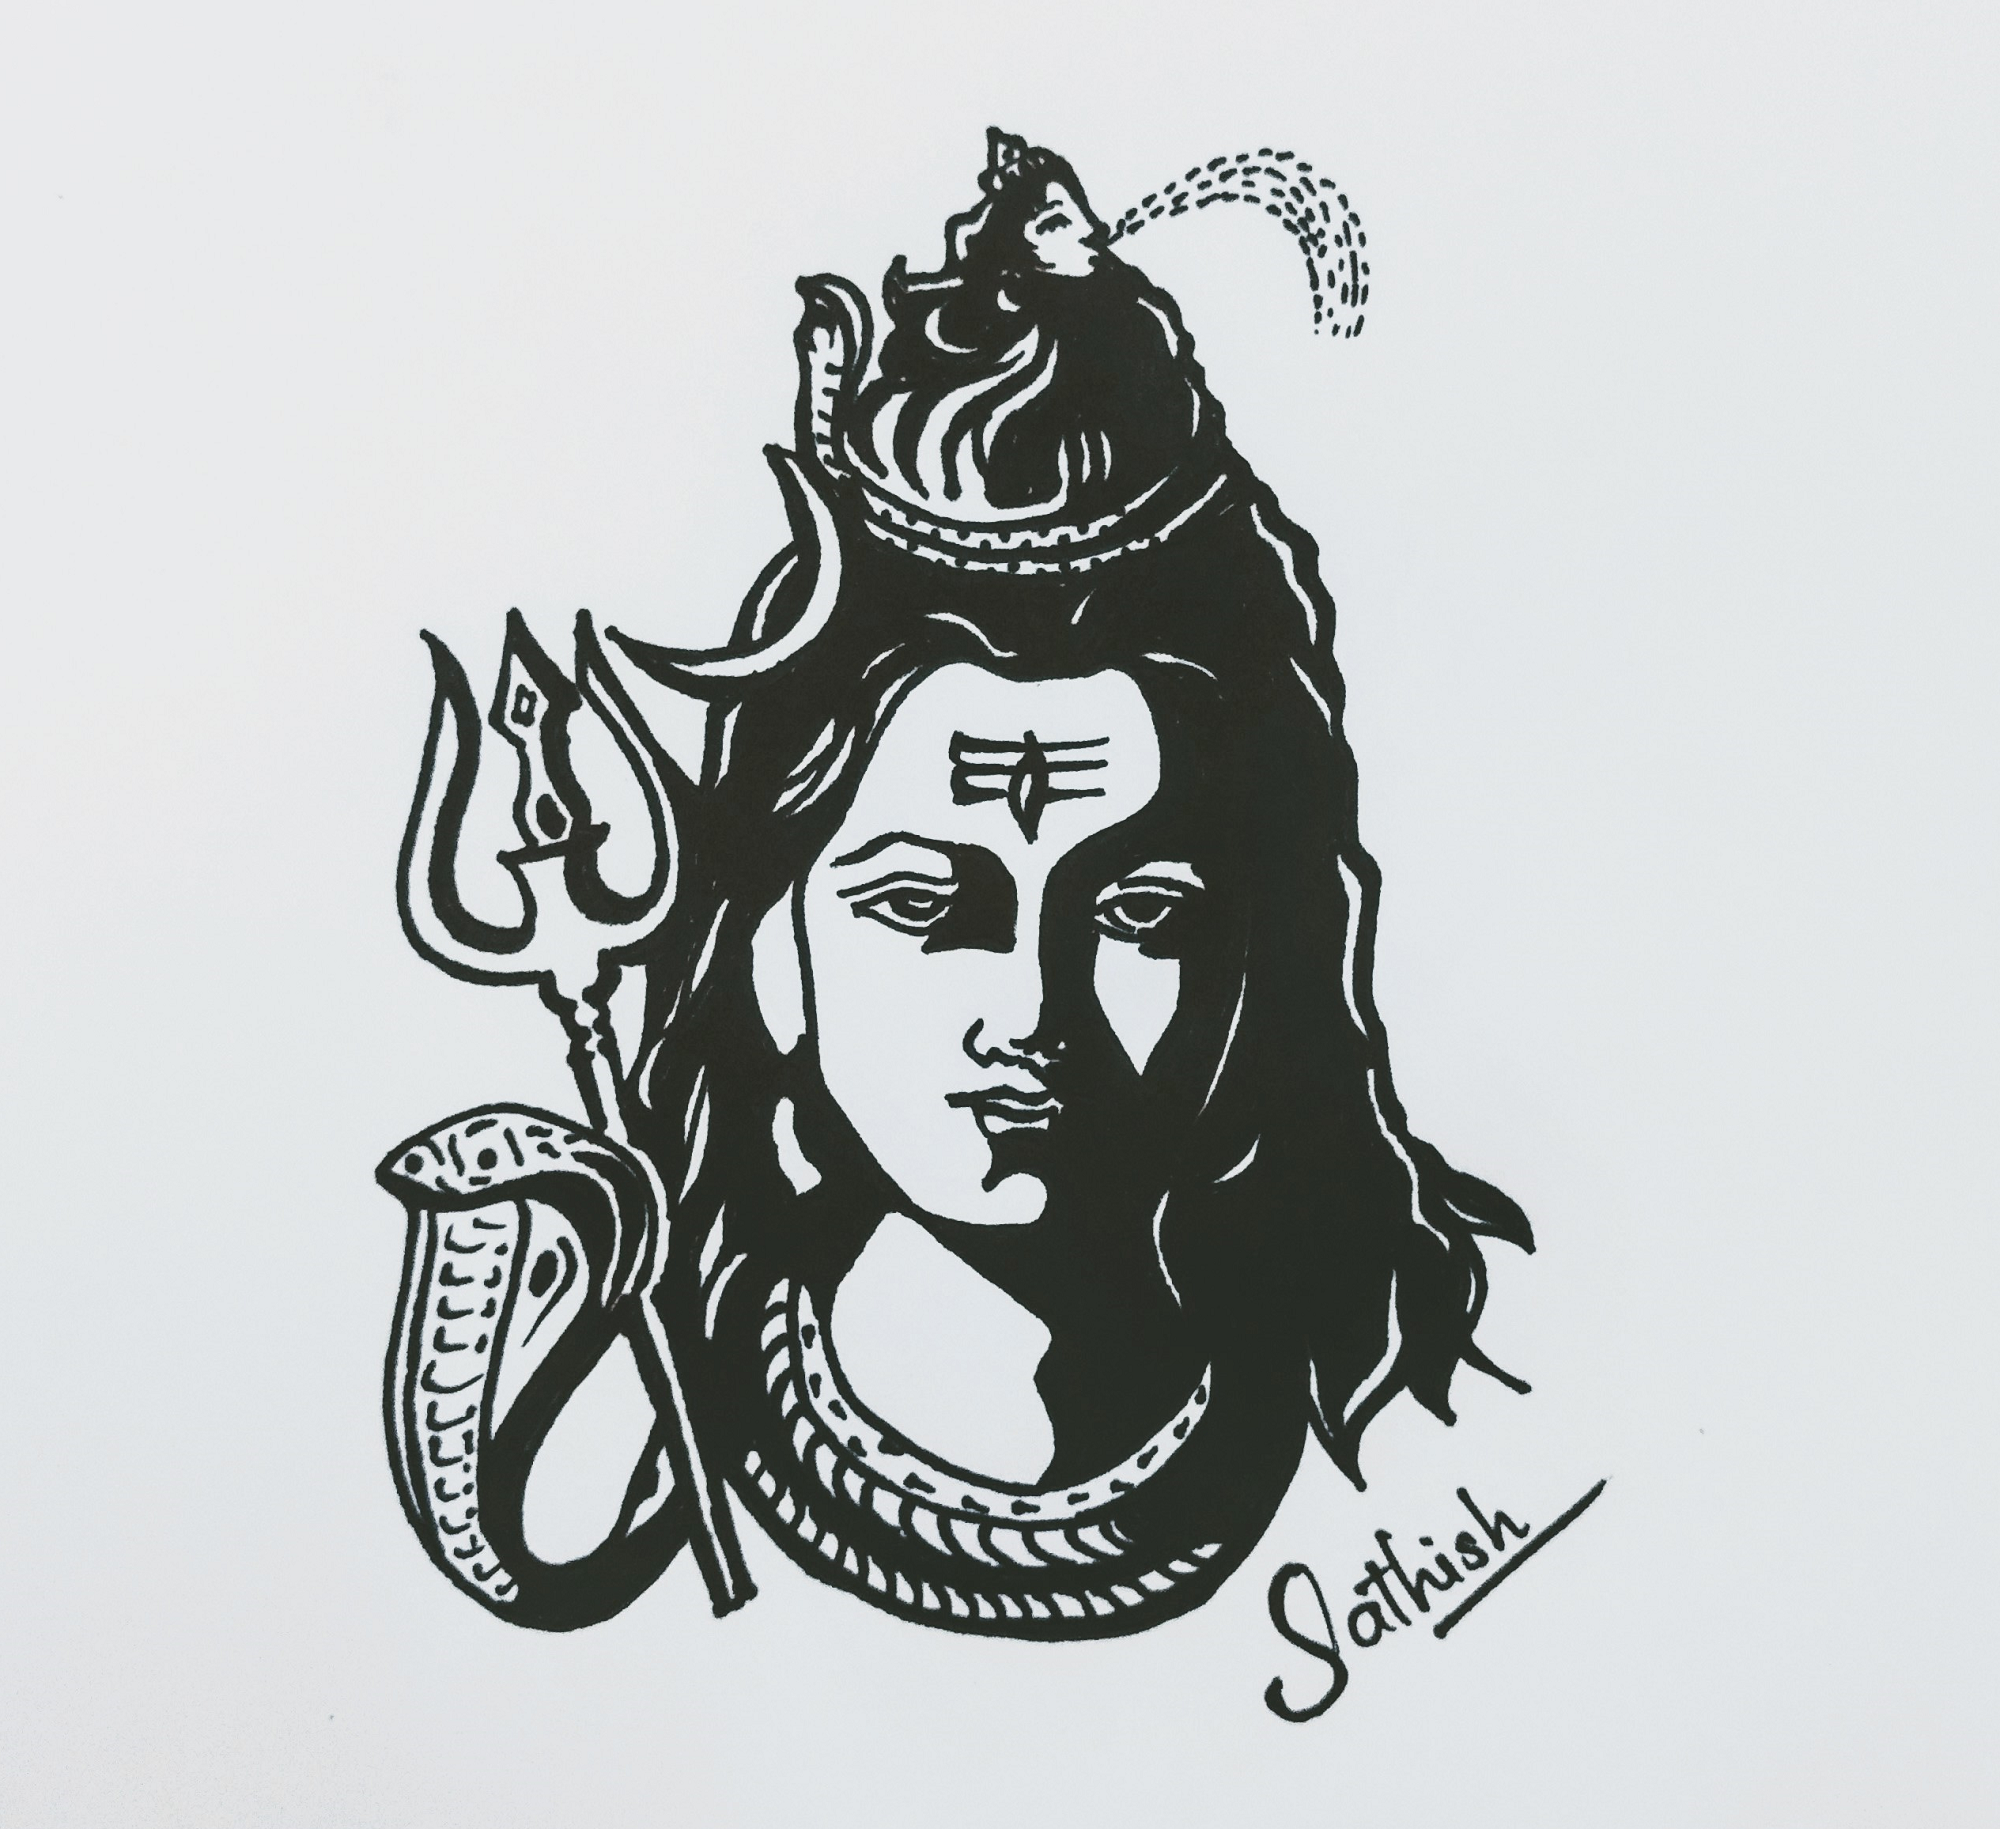 1466 Lord Shiva Sketches Images Stock Photos  Vectors  Shutterstock